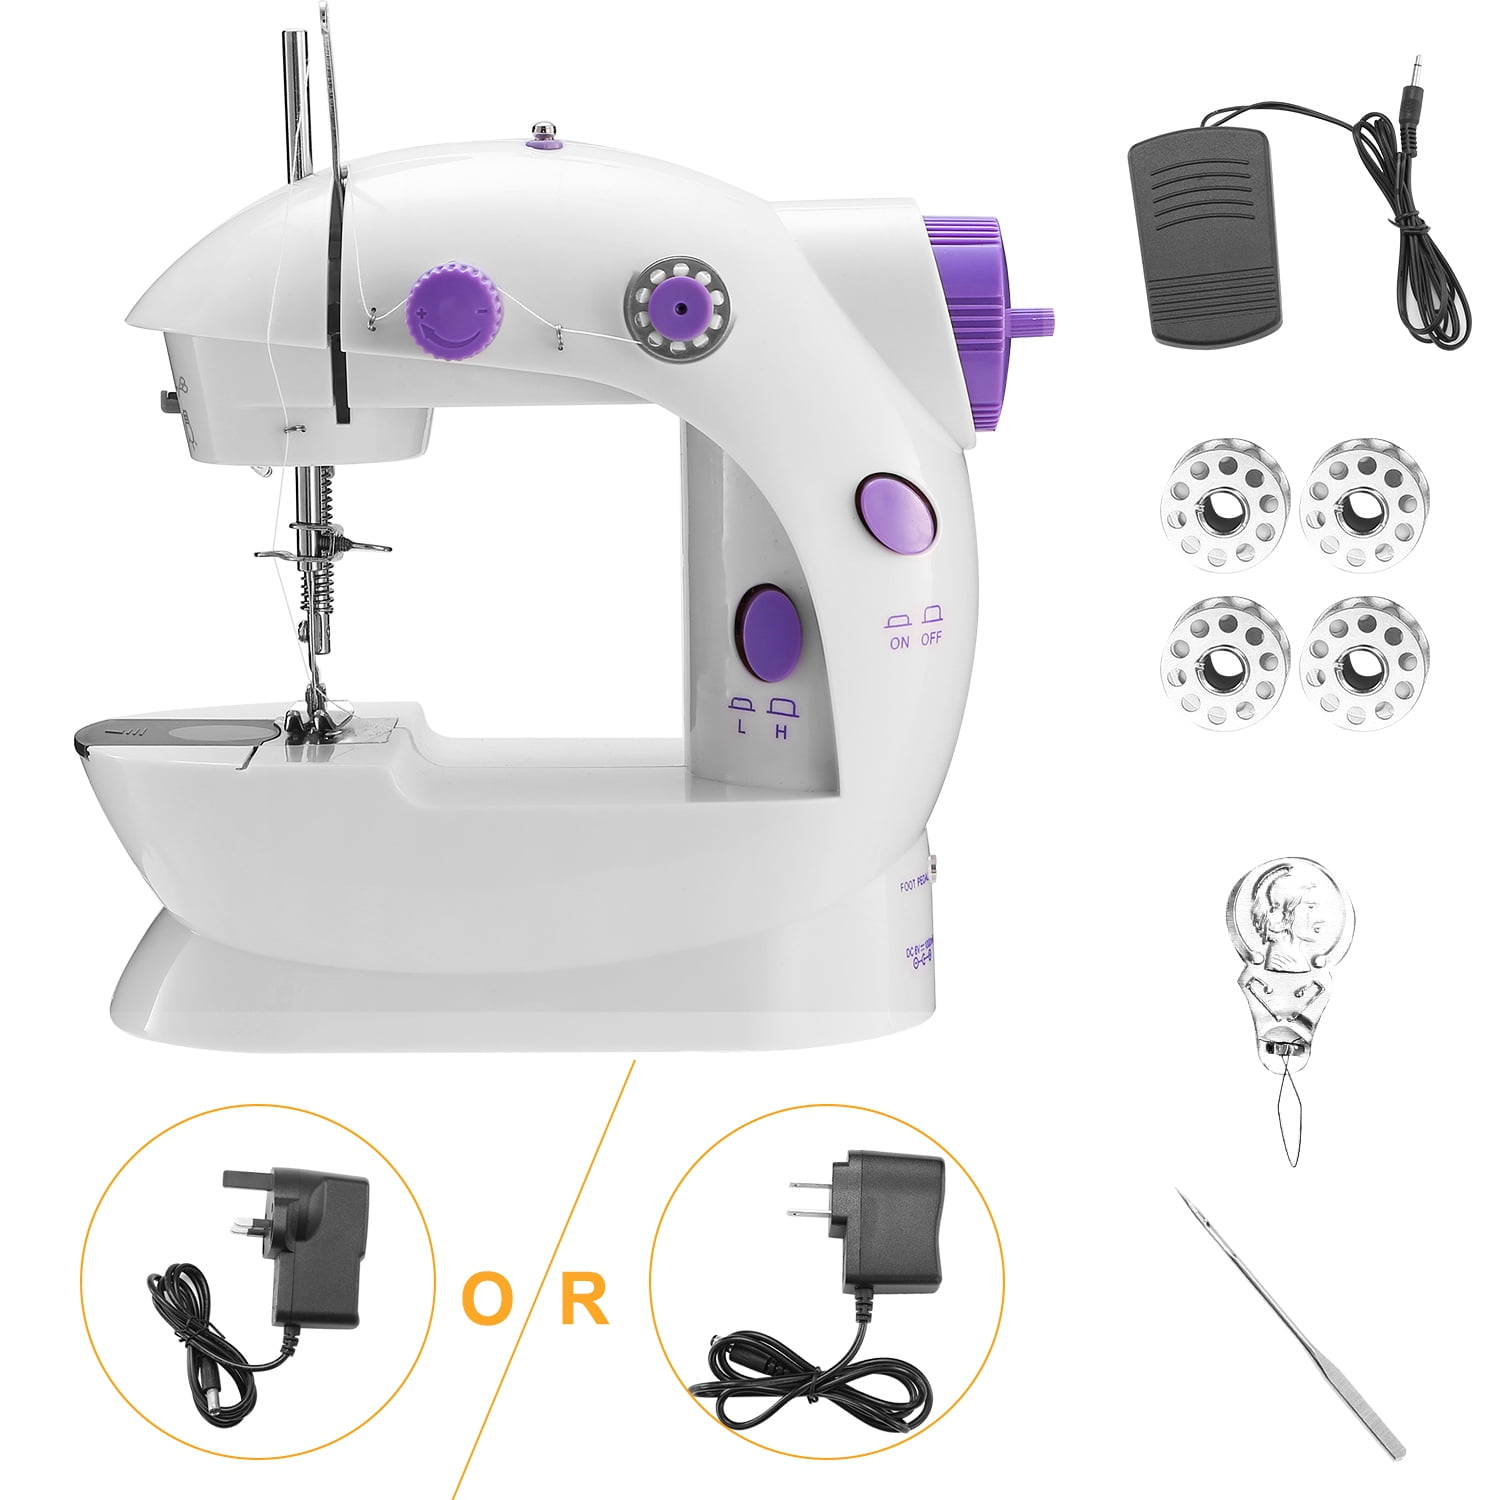  KUAIE Sewing Machine, Mini Sewing Machine for Beginners with  LED Light Electric Embroidery Machine for Kids, Adult, Household (Size :  20x10x19cm)